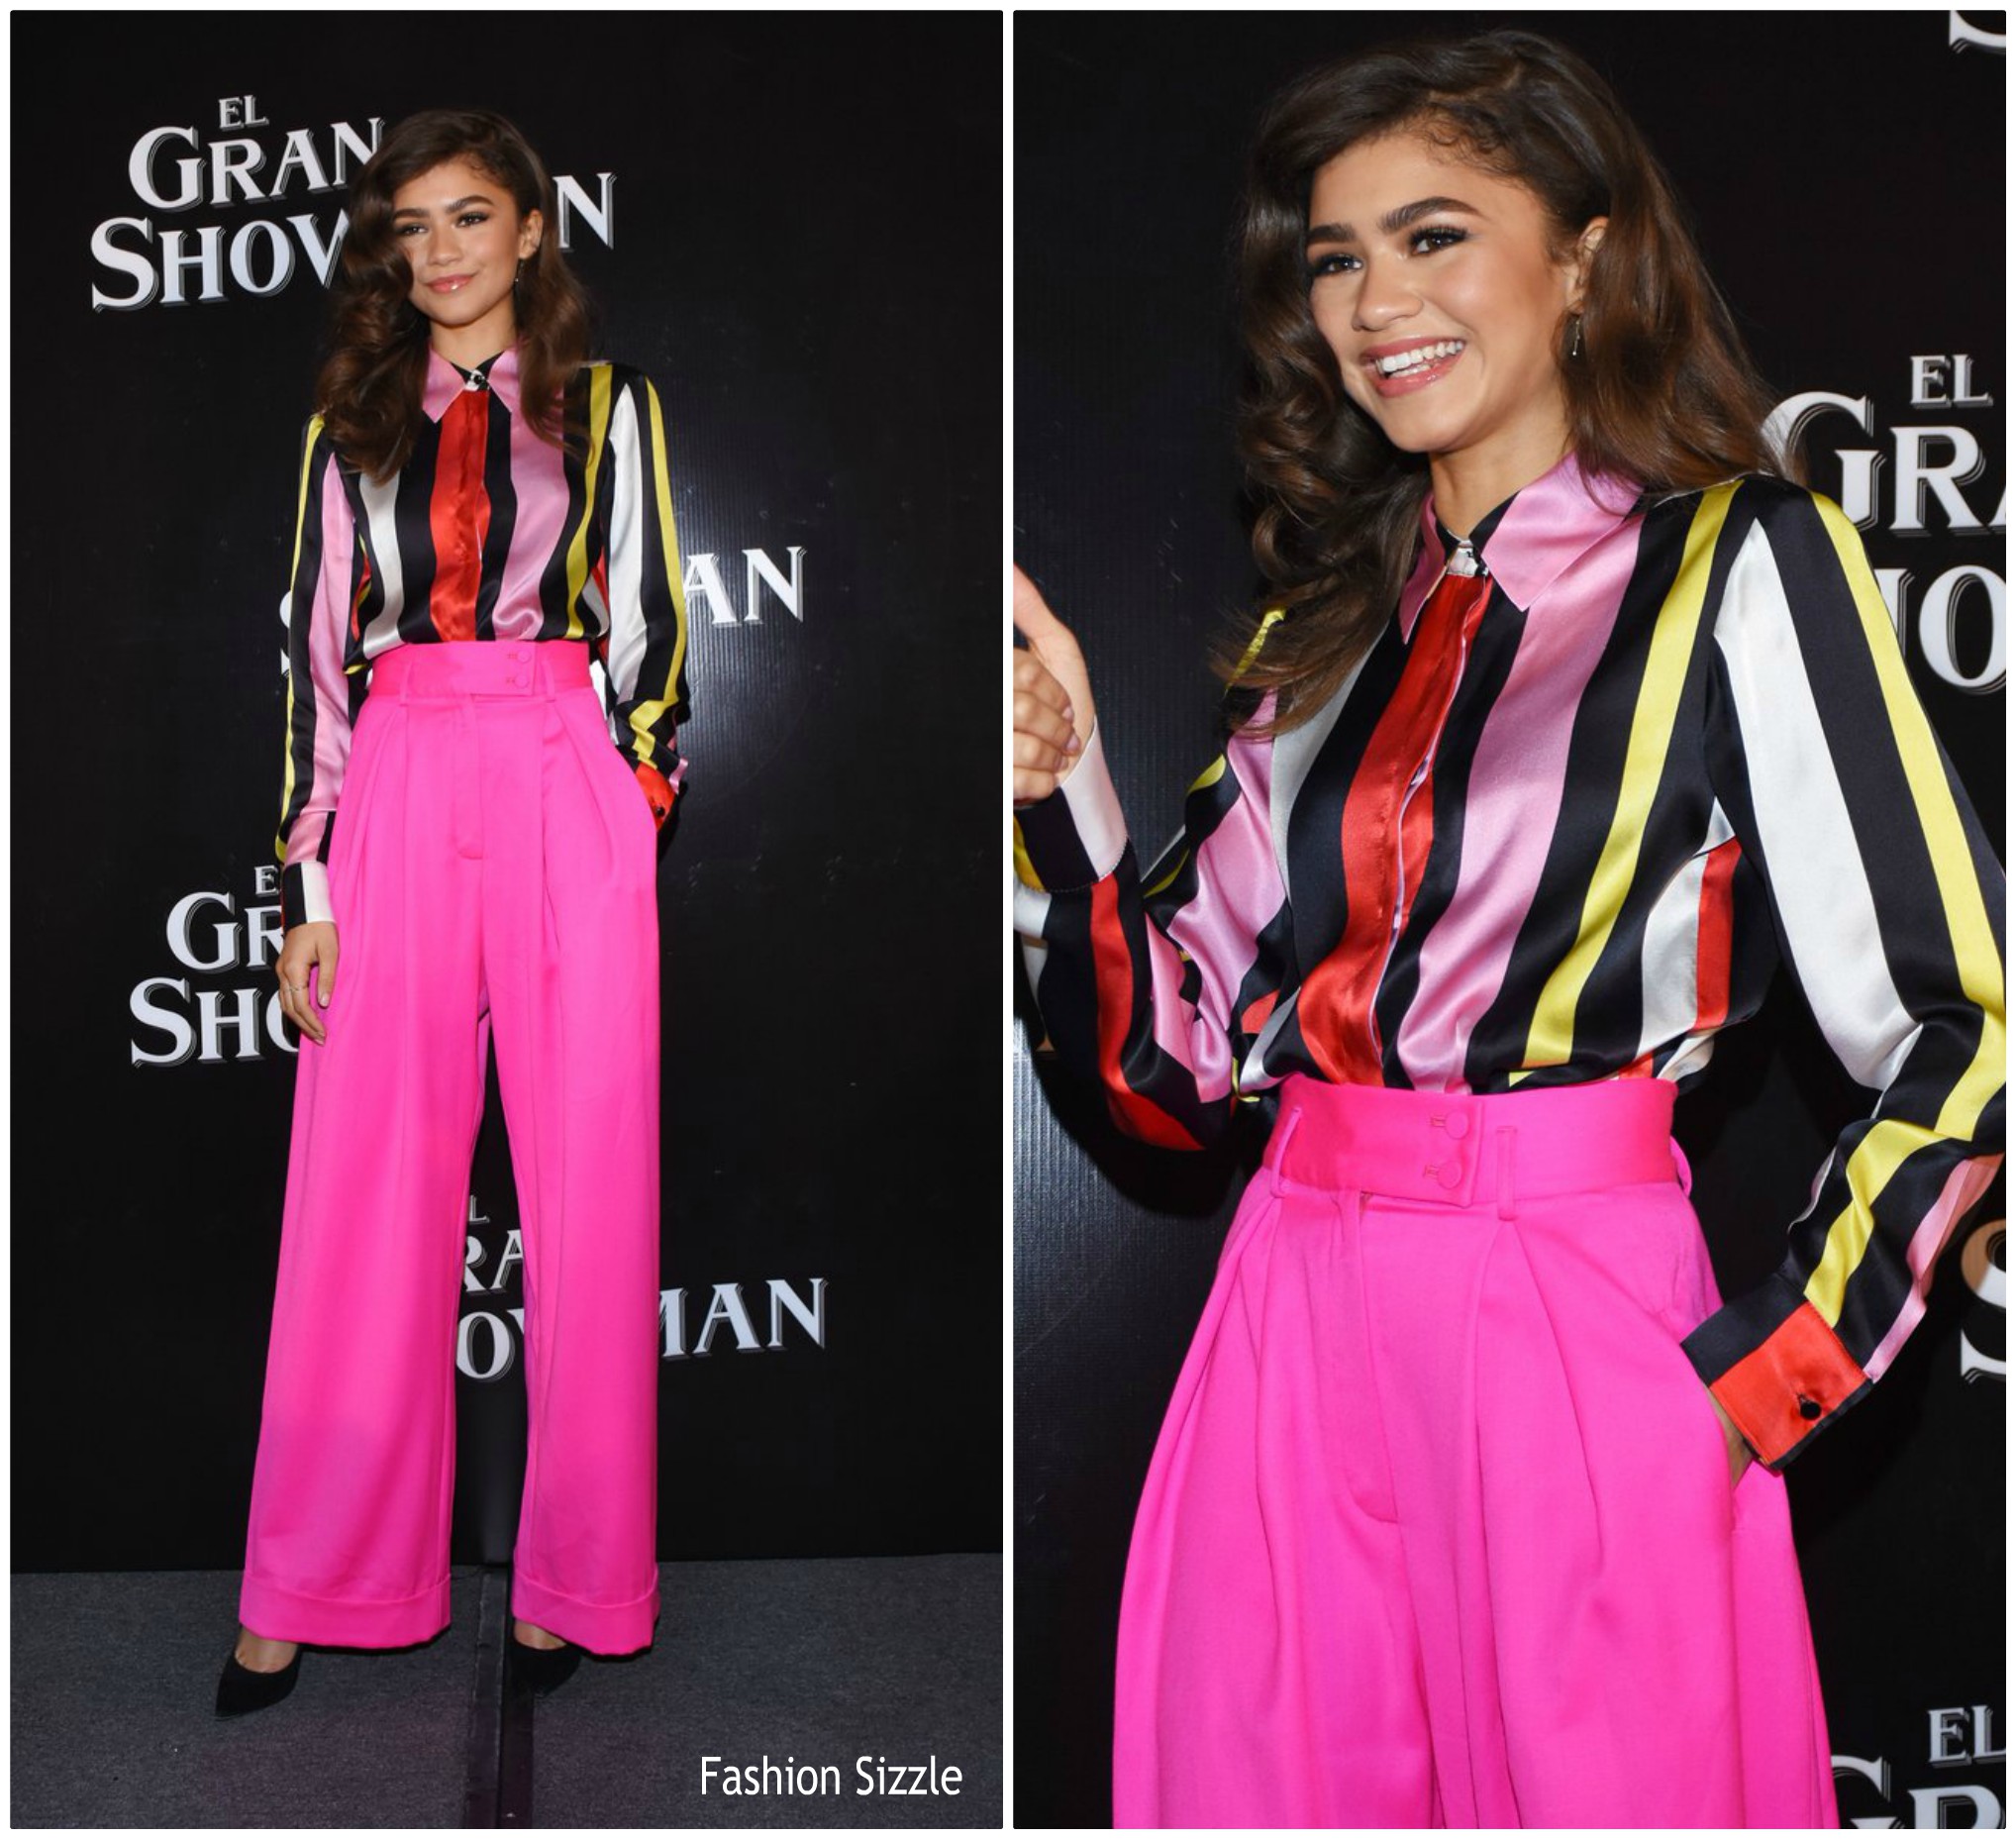 Zendaya  In  Maria Escote  & Styland –  “The Greatest Showman ” Mexico Press Conference